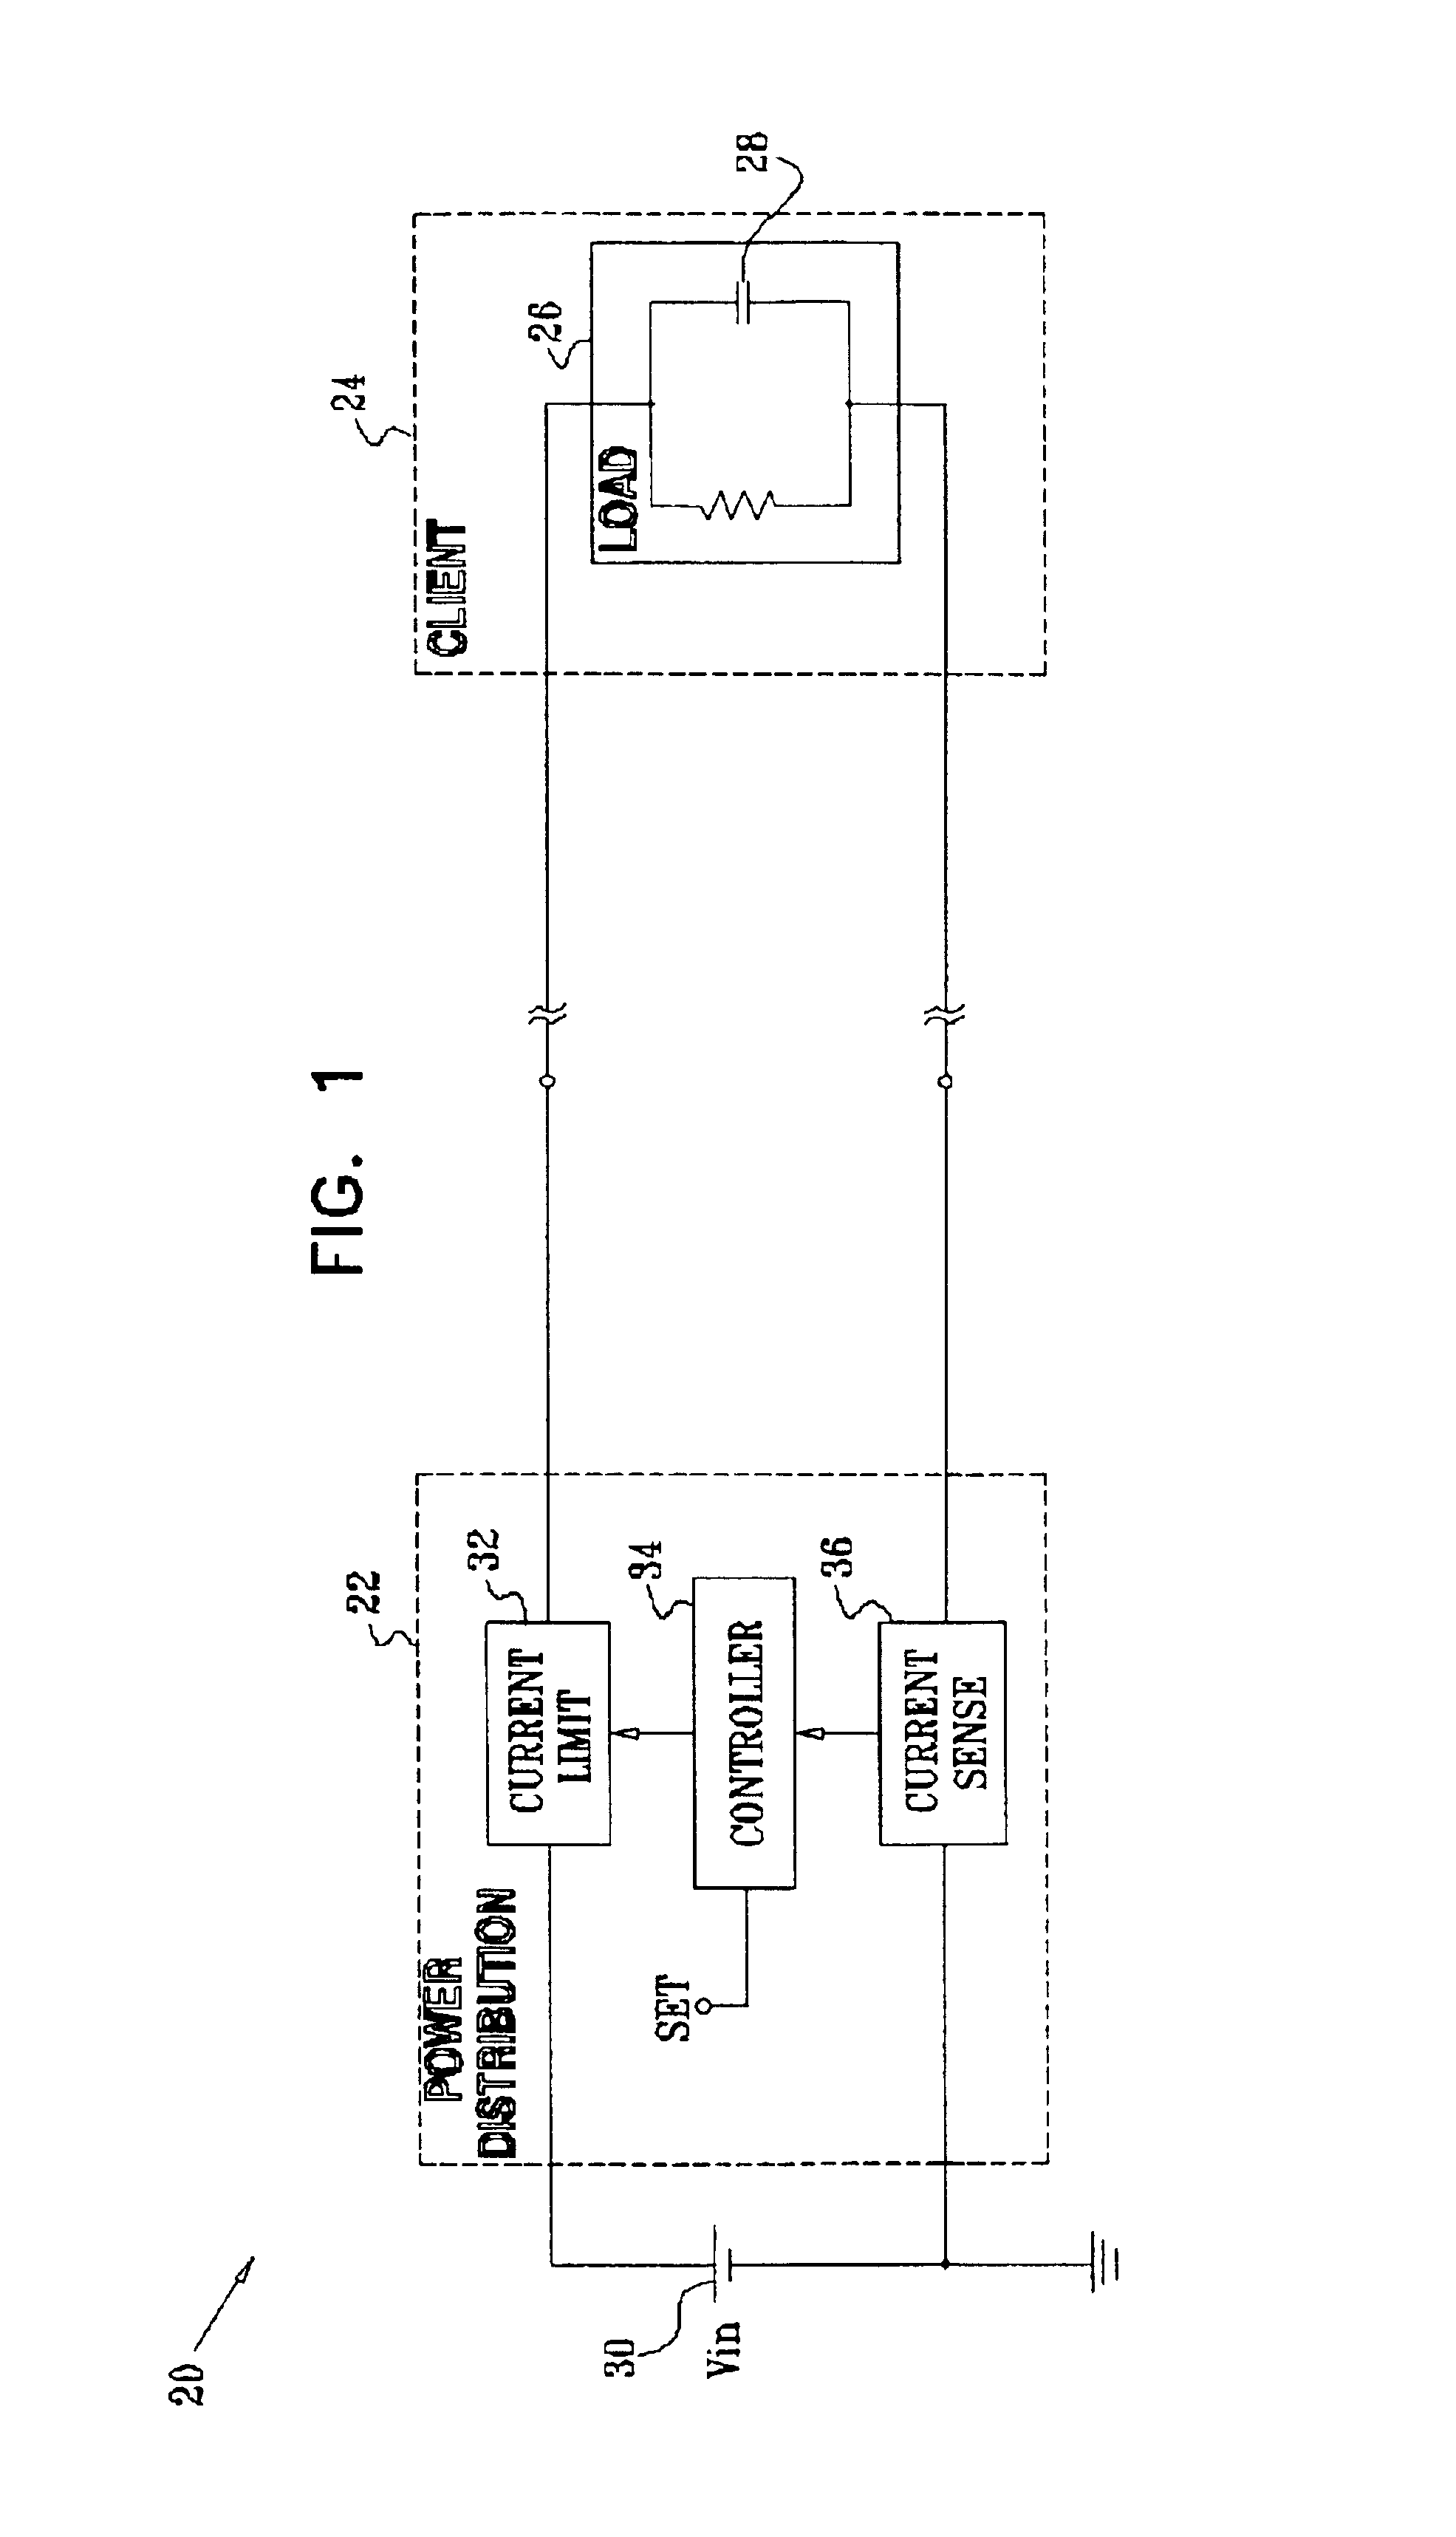 Power distribution with digital current control